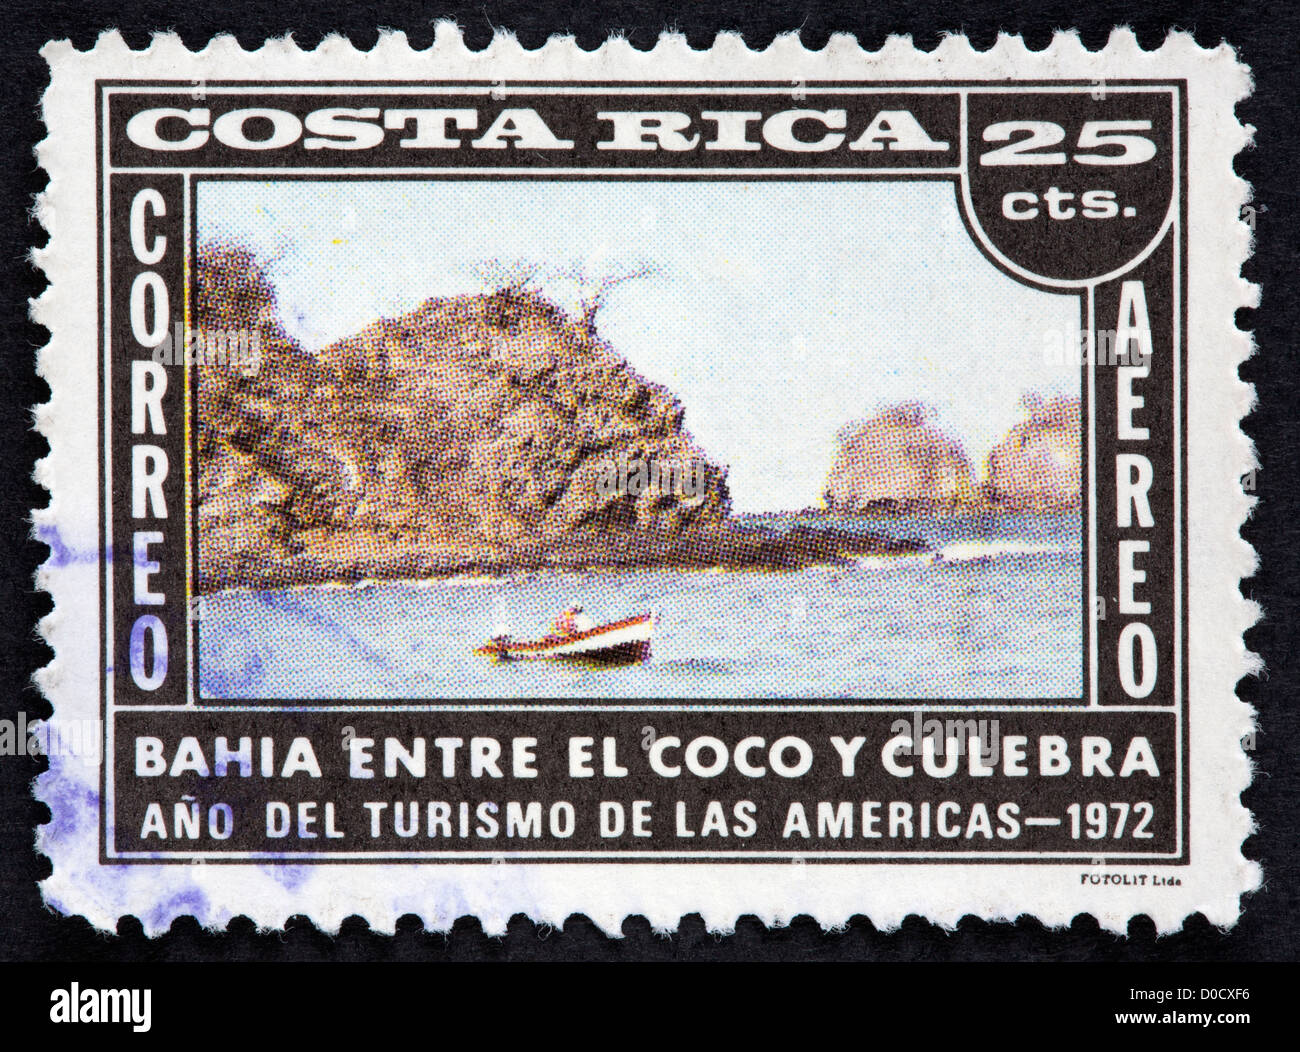 Costa Rican postage stamp Stock Photo